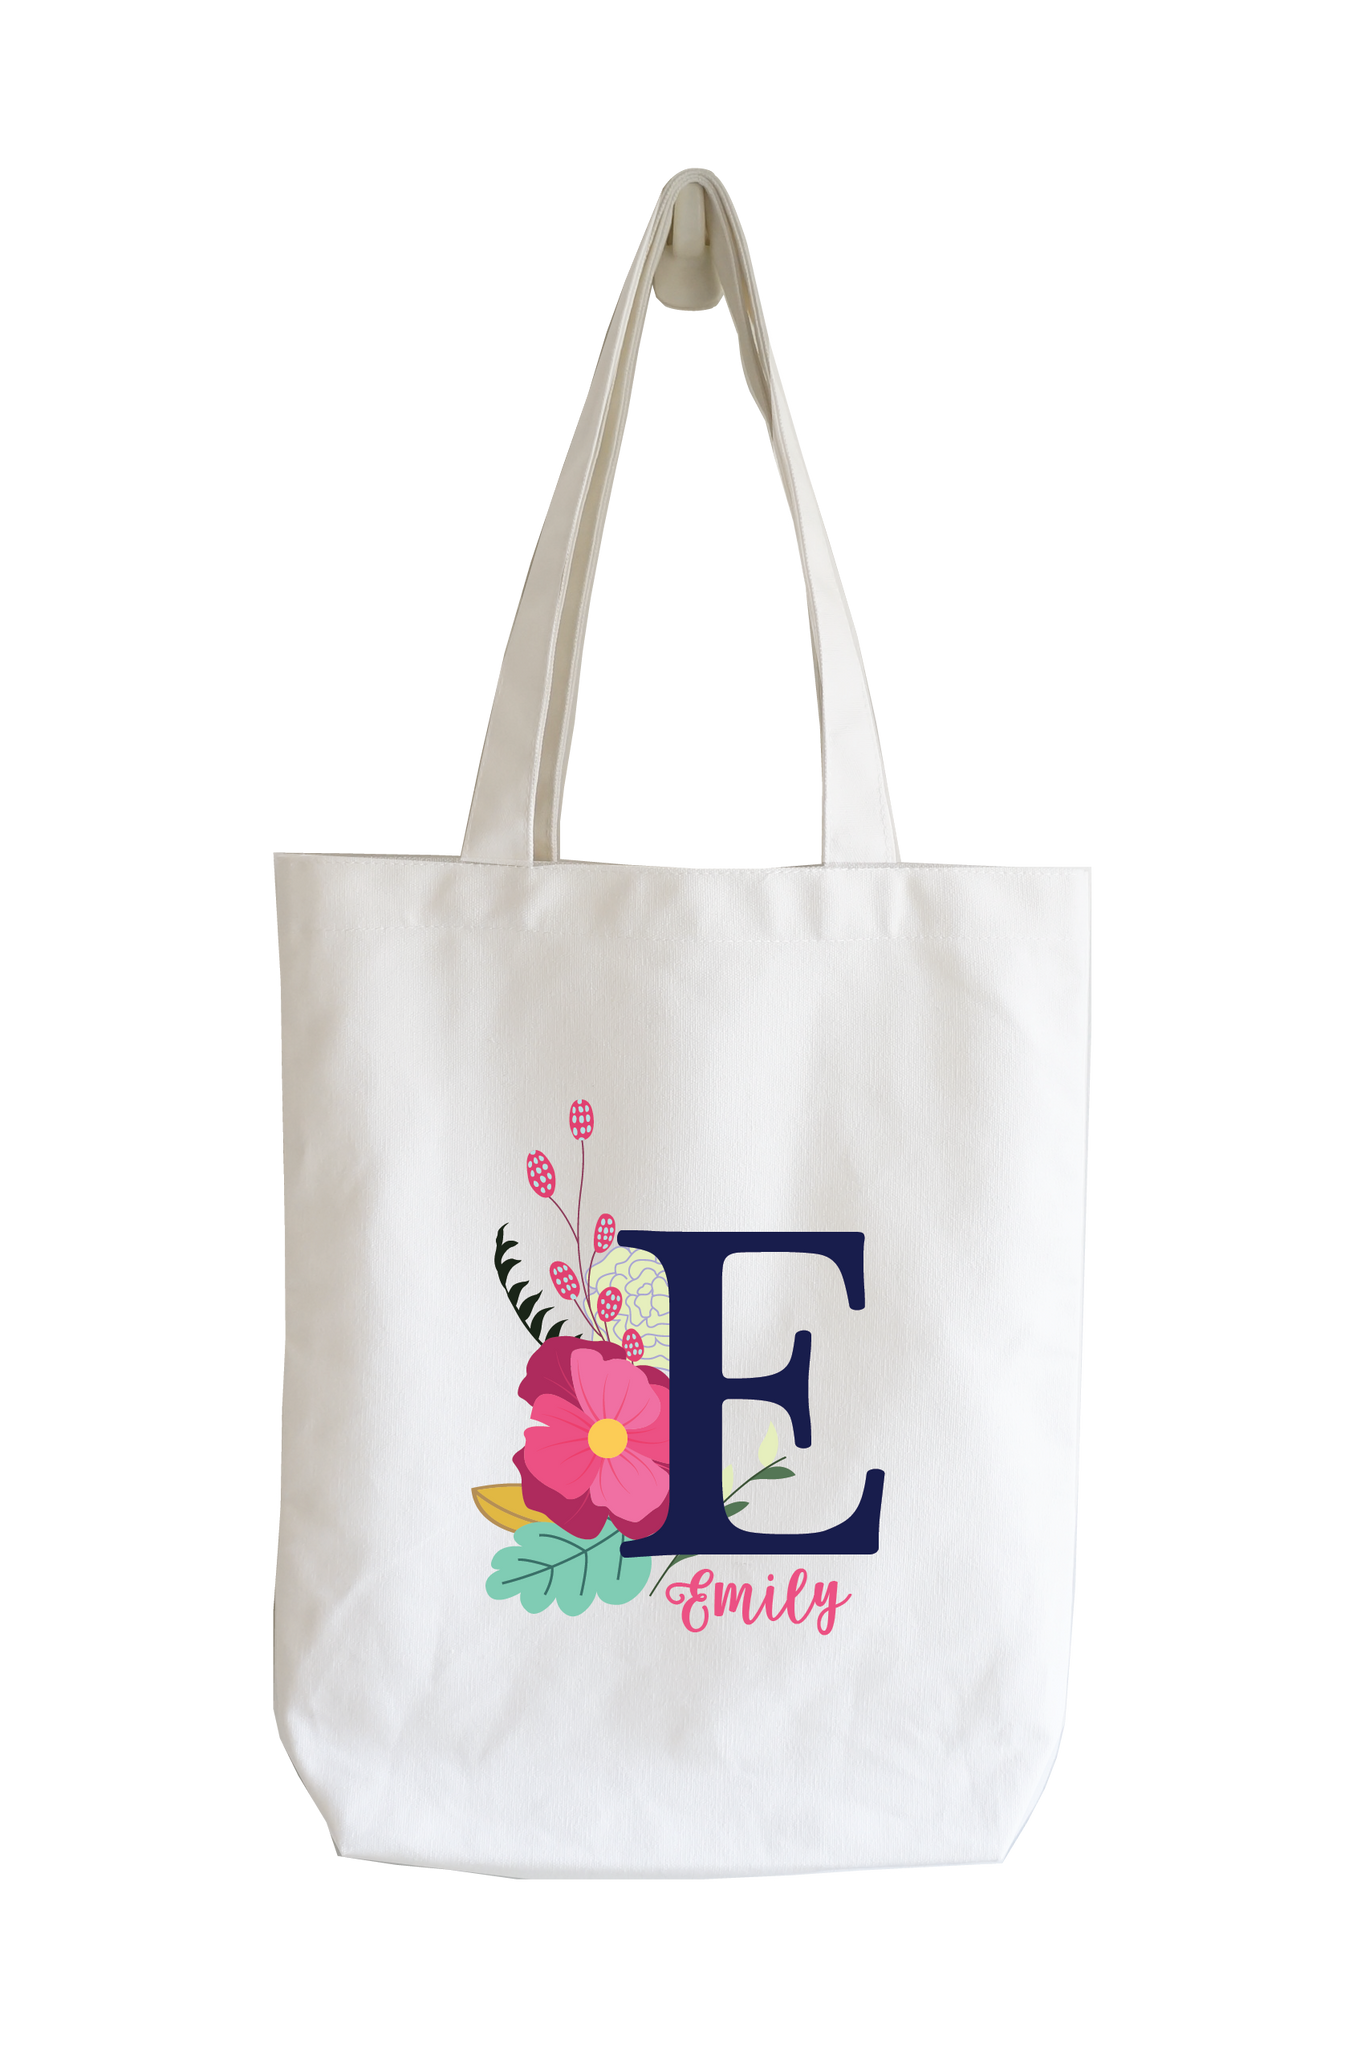 Small Circle Monogram Design, Personalized Tote Bag – Initial Outfitters